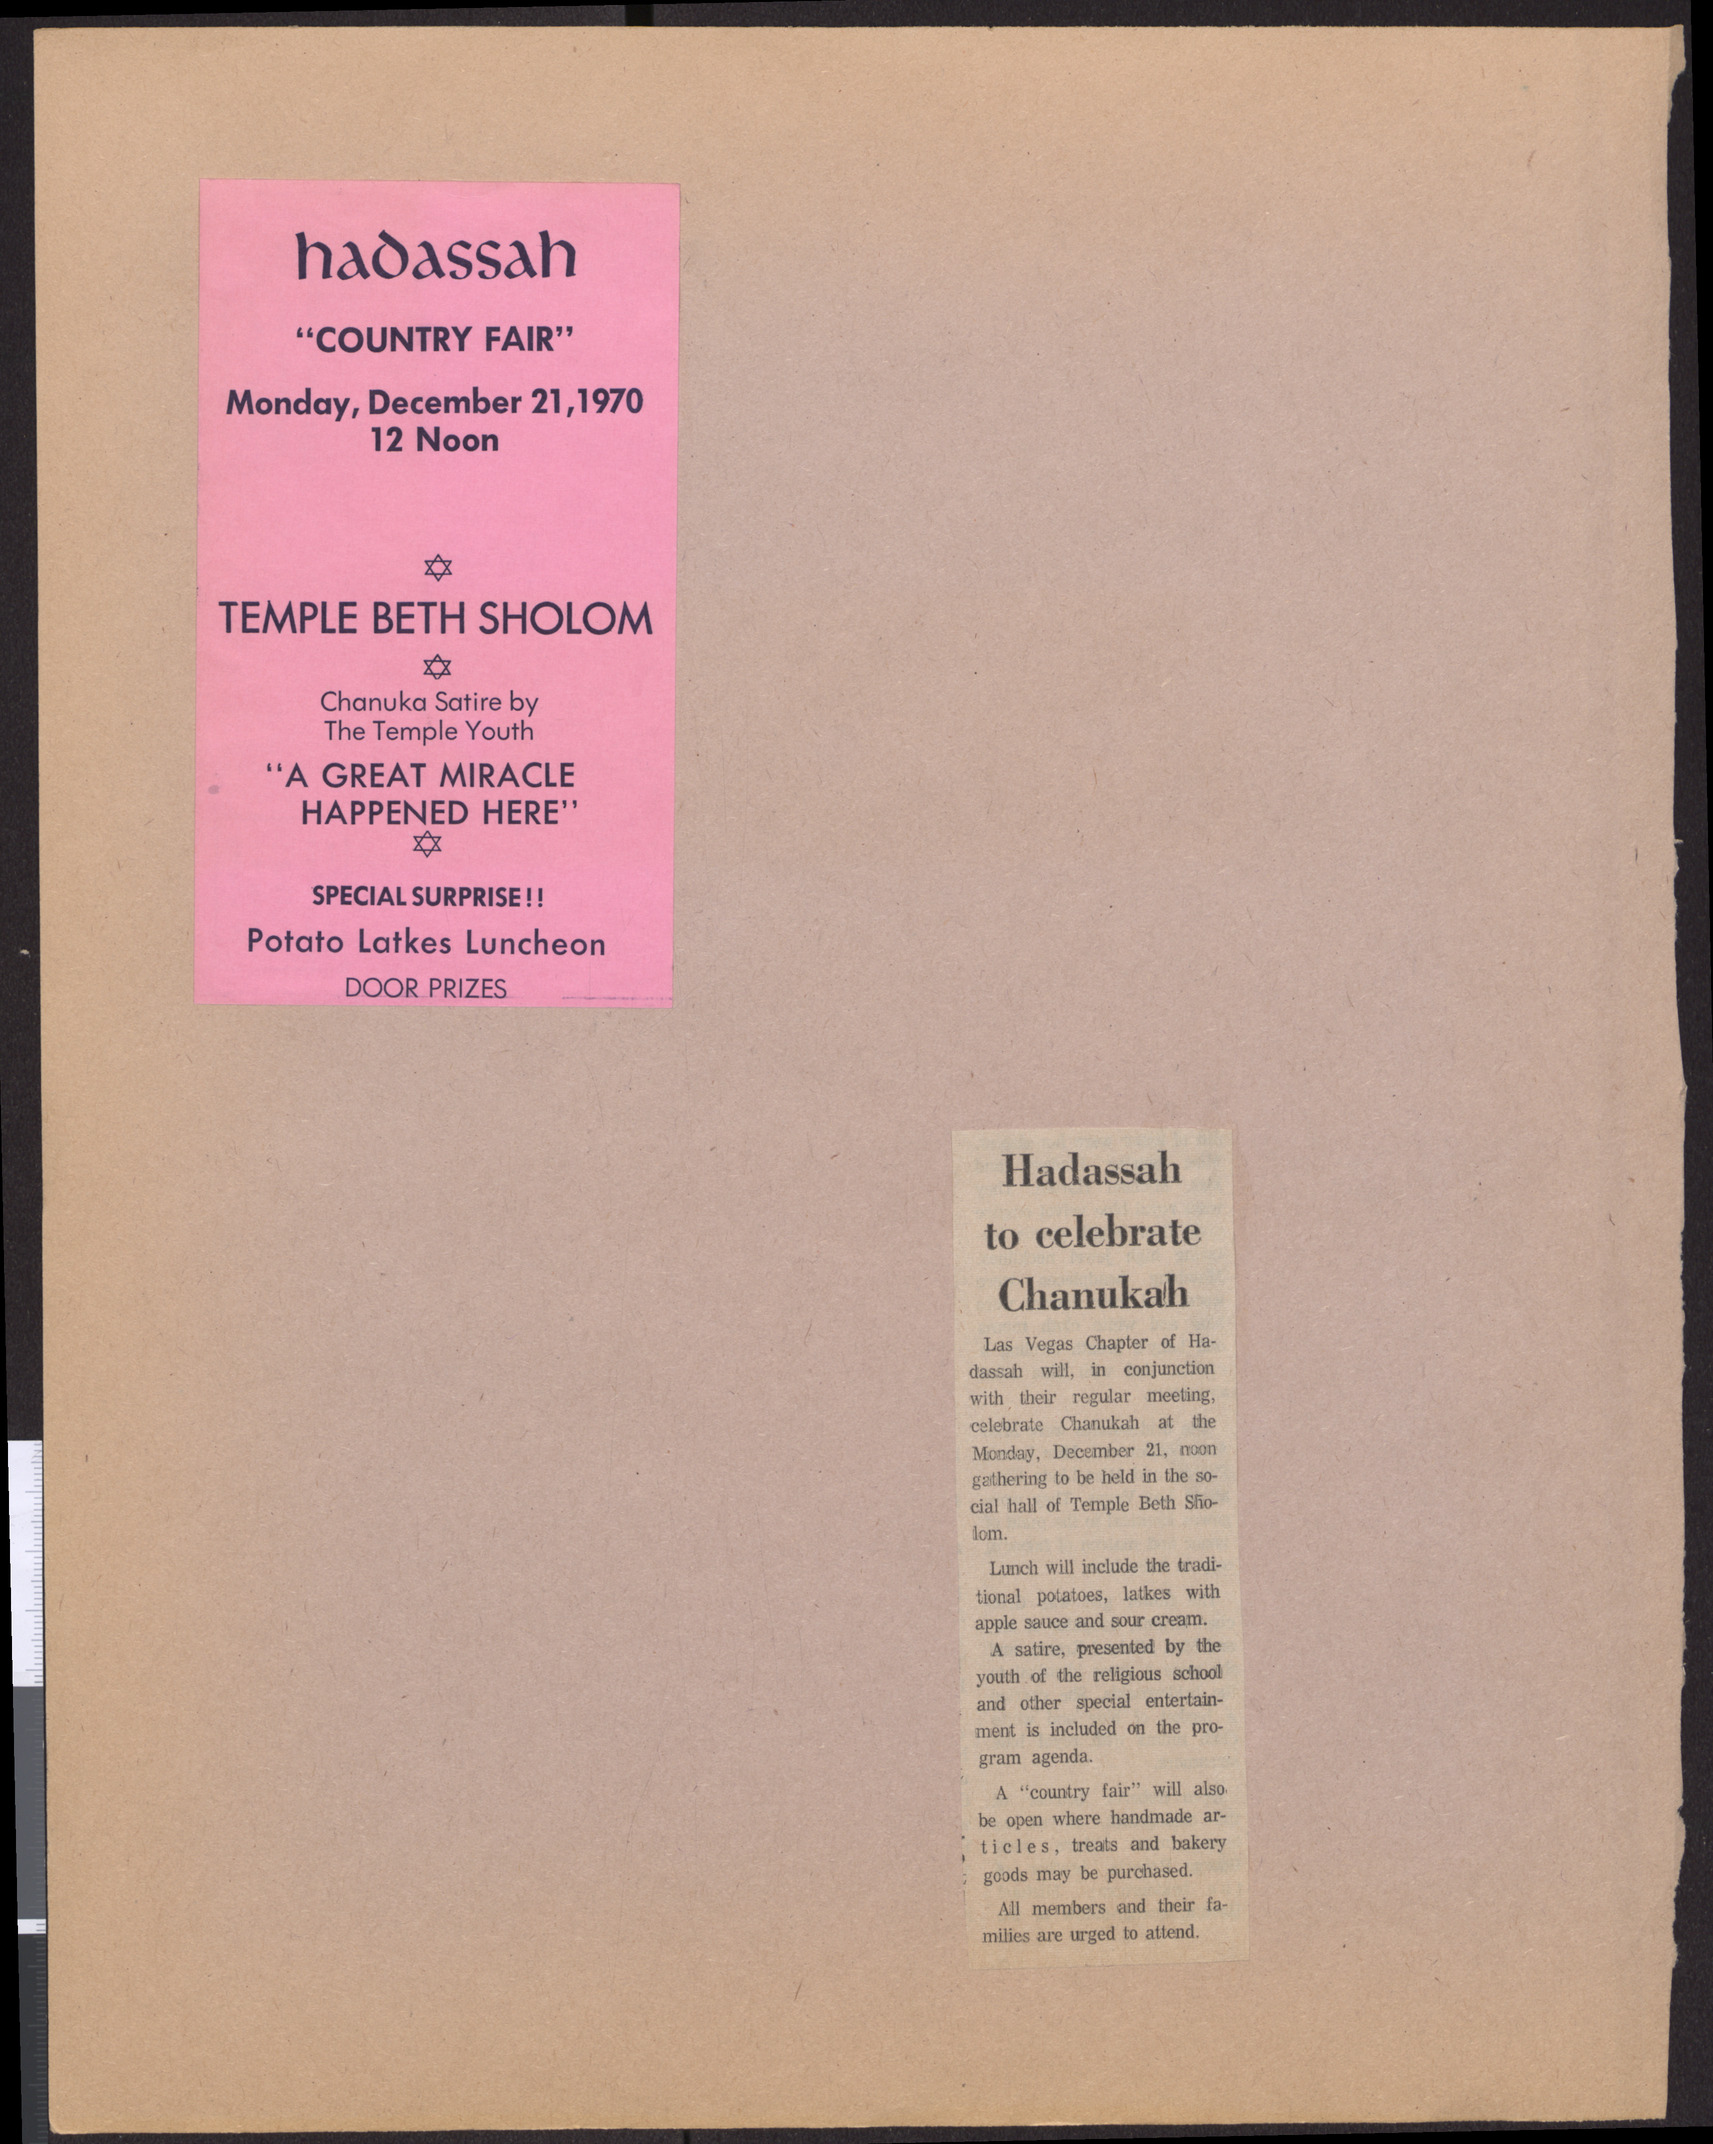 Hadassah event notice, Country Fair, December 21, 1970, and newspaper clipping about Hadassah Chanukah event